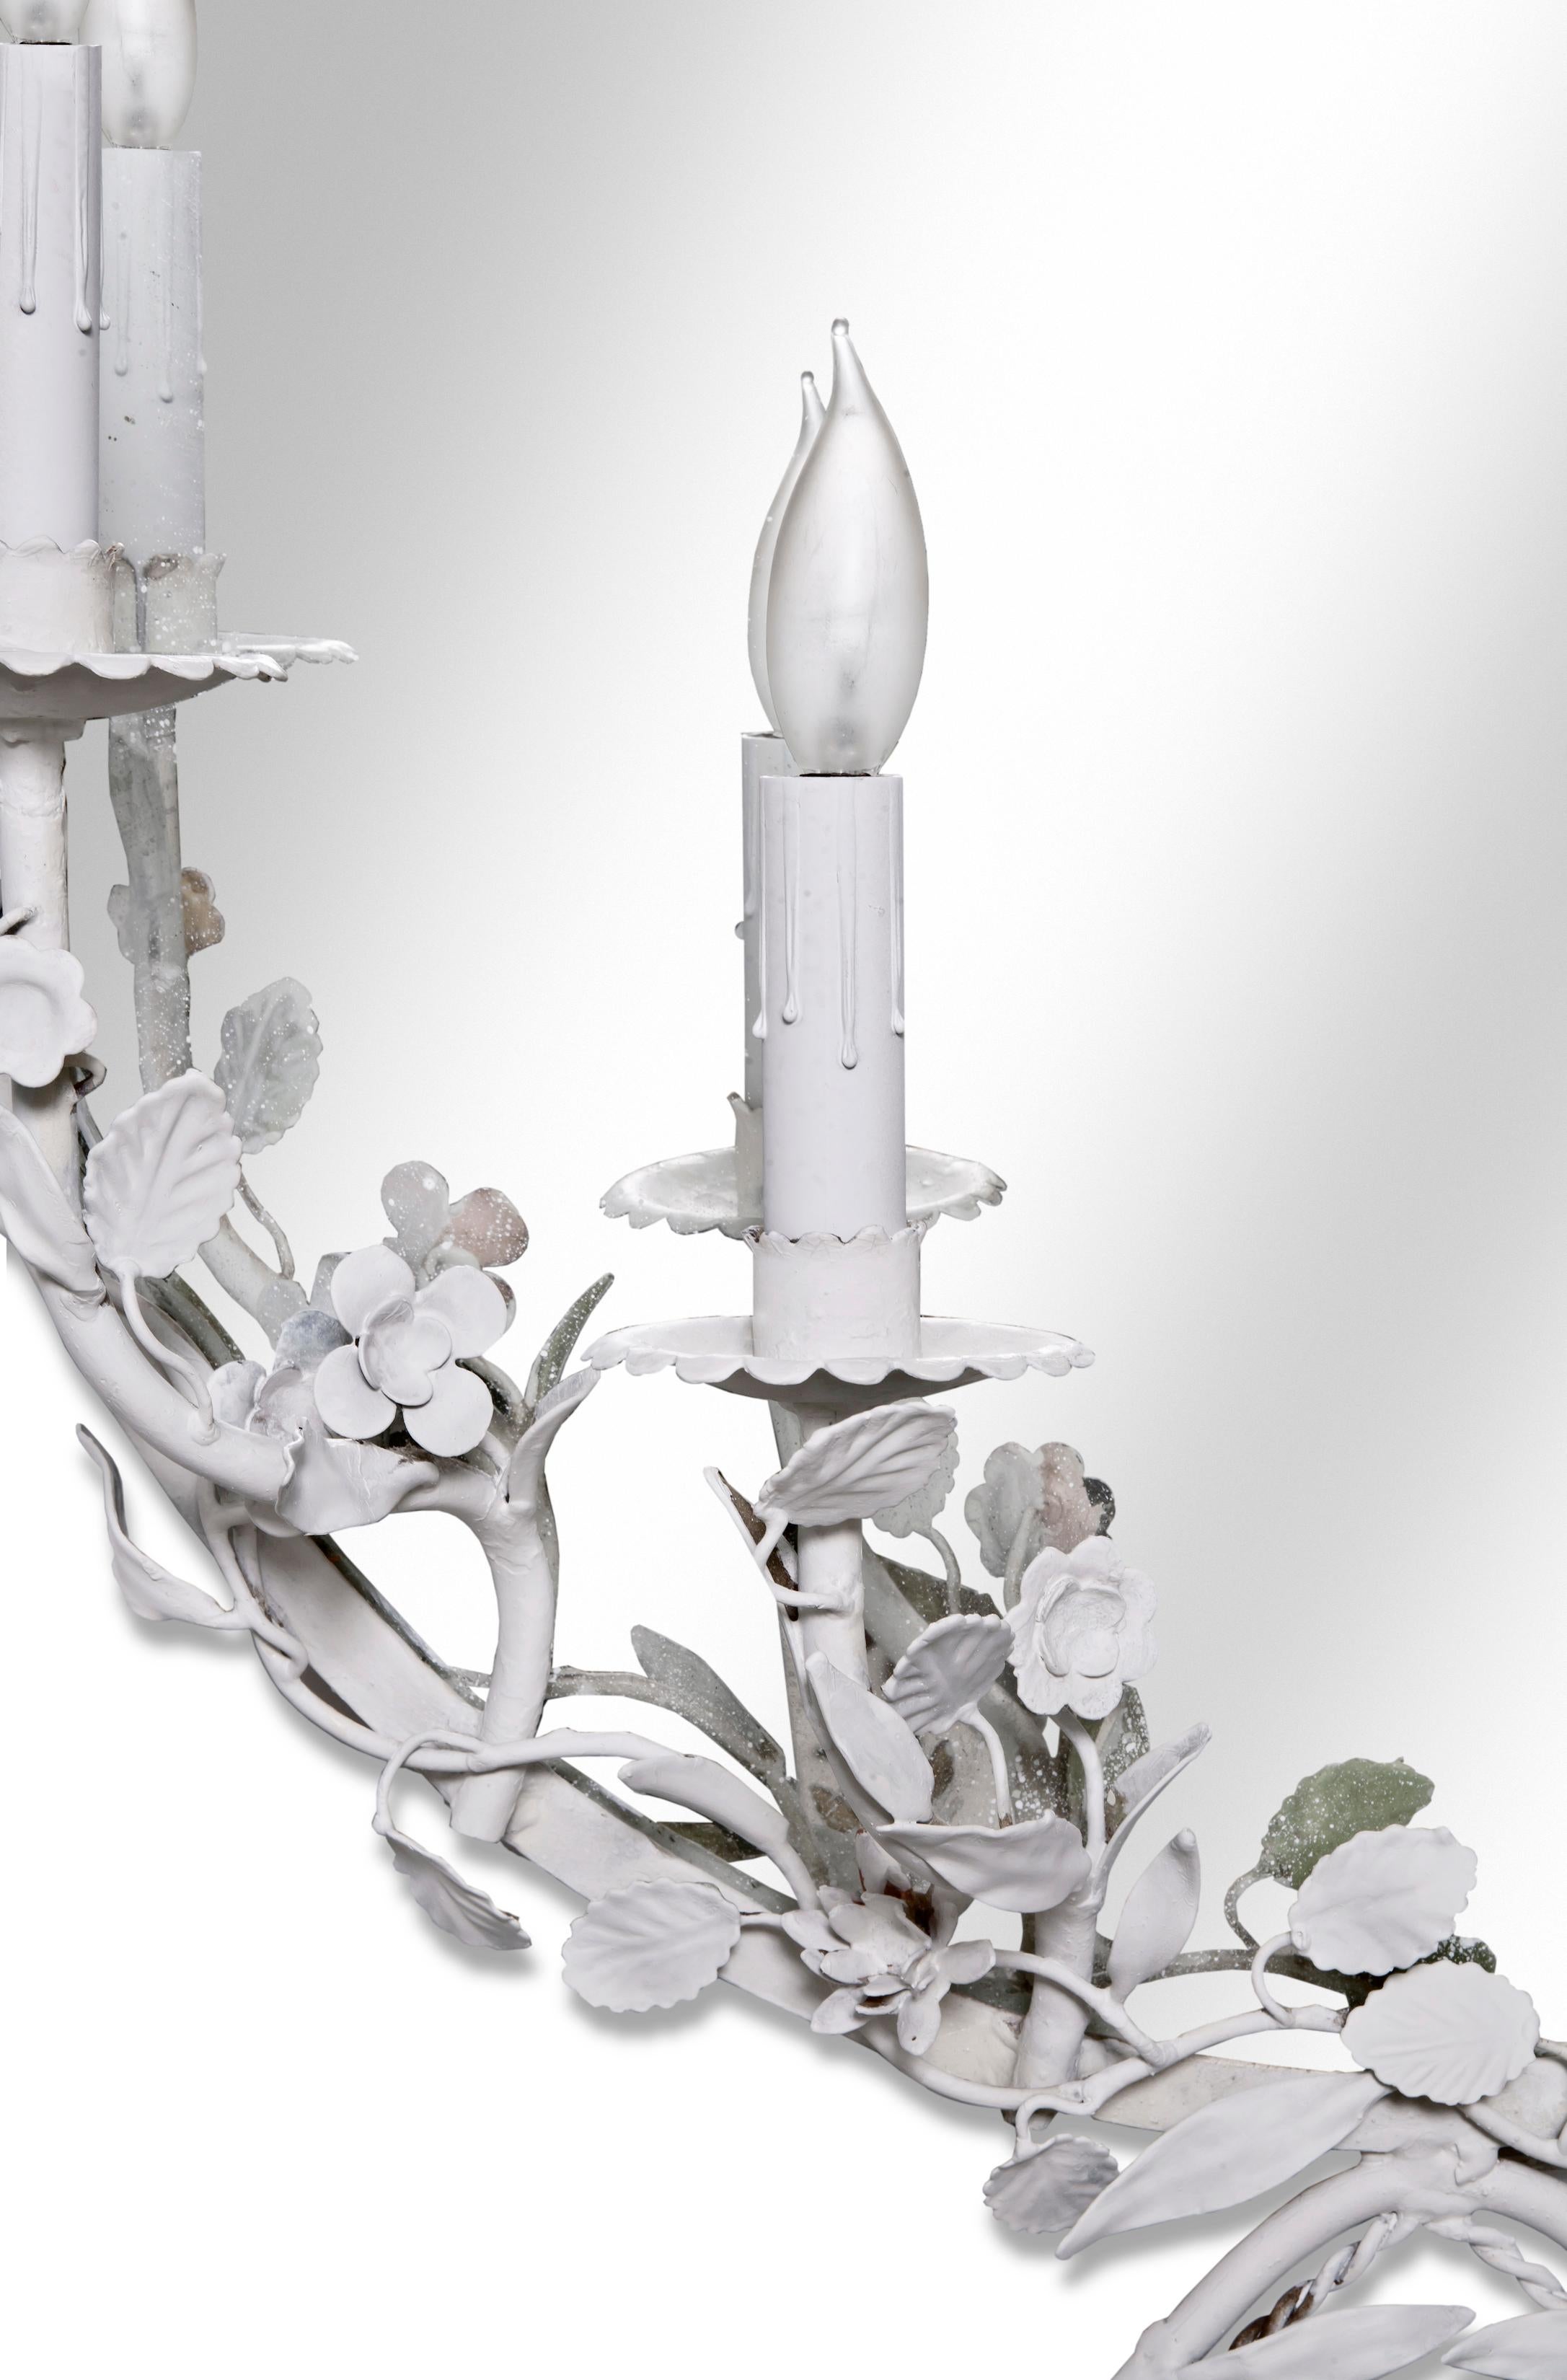 Italian Oval mirrored sconce with 4 lights. Refreshed in hand painted white finish.
Iron flowers & leaves. Newly rewired with clear cord & in line switch. Takes standard chandelier 5-15 W bulbs.